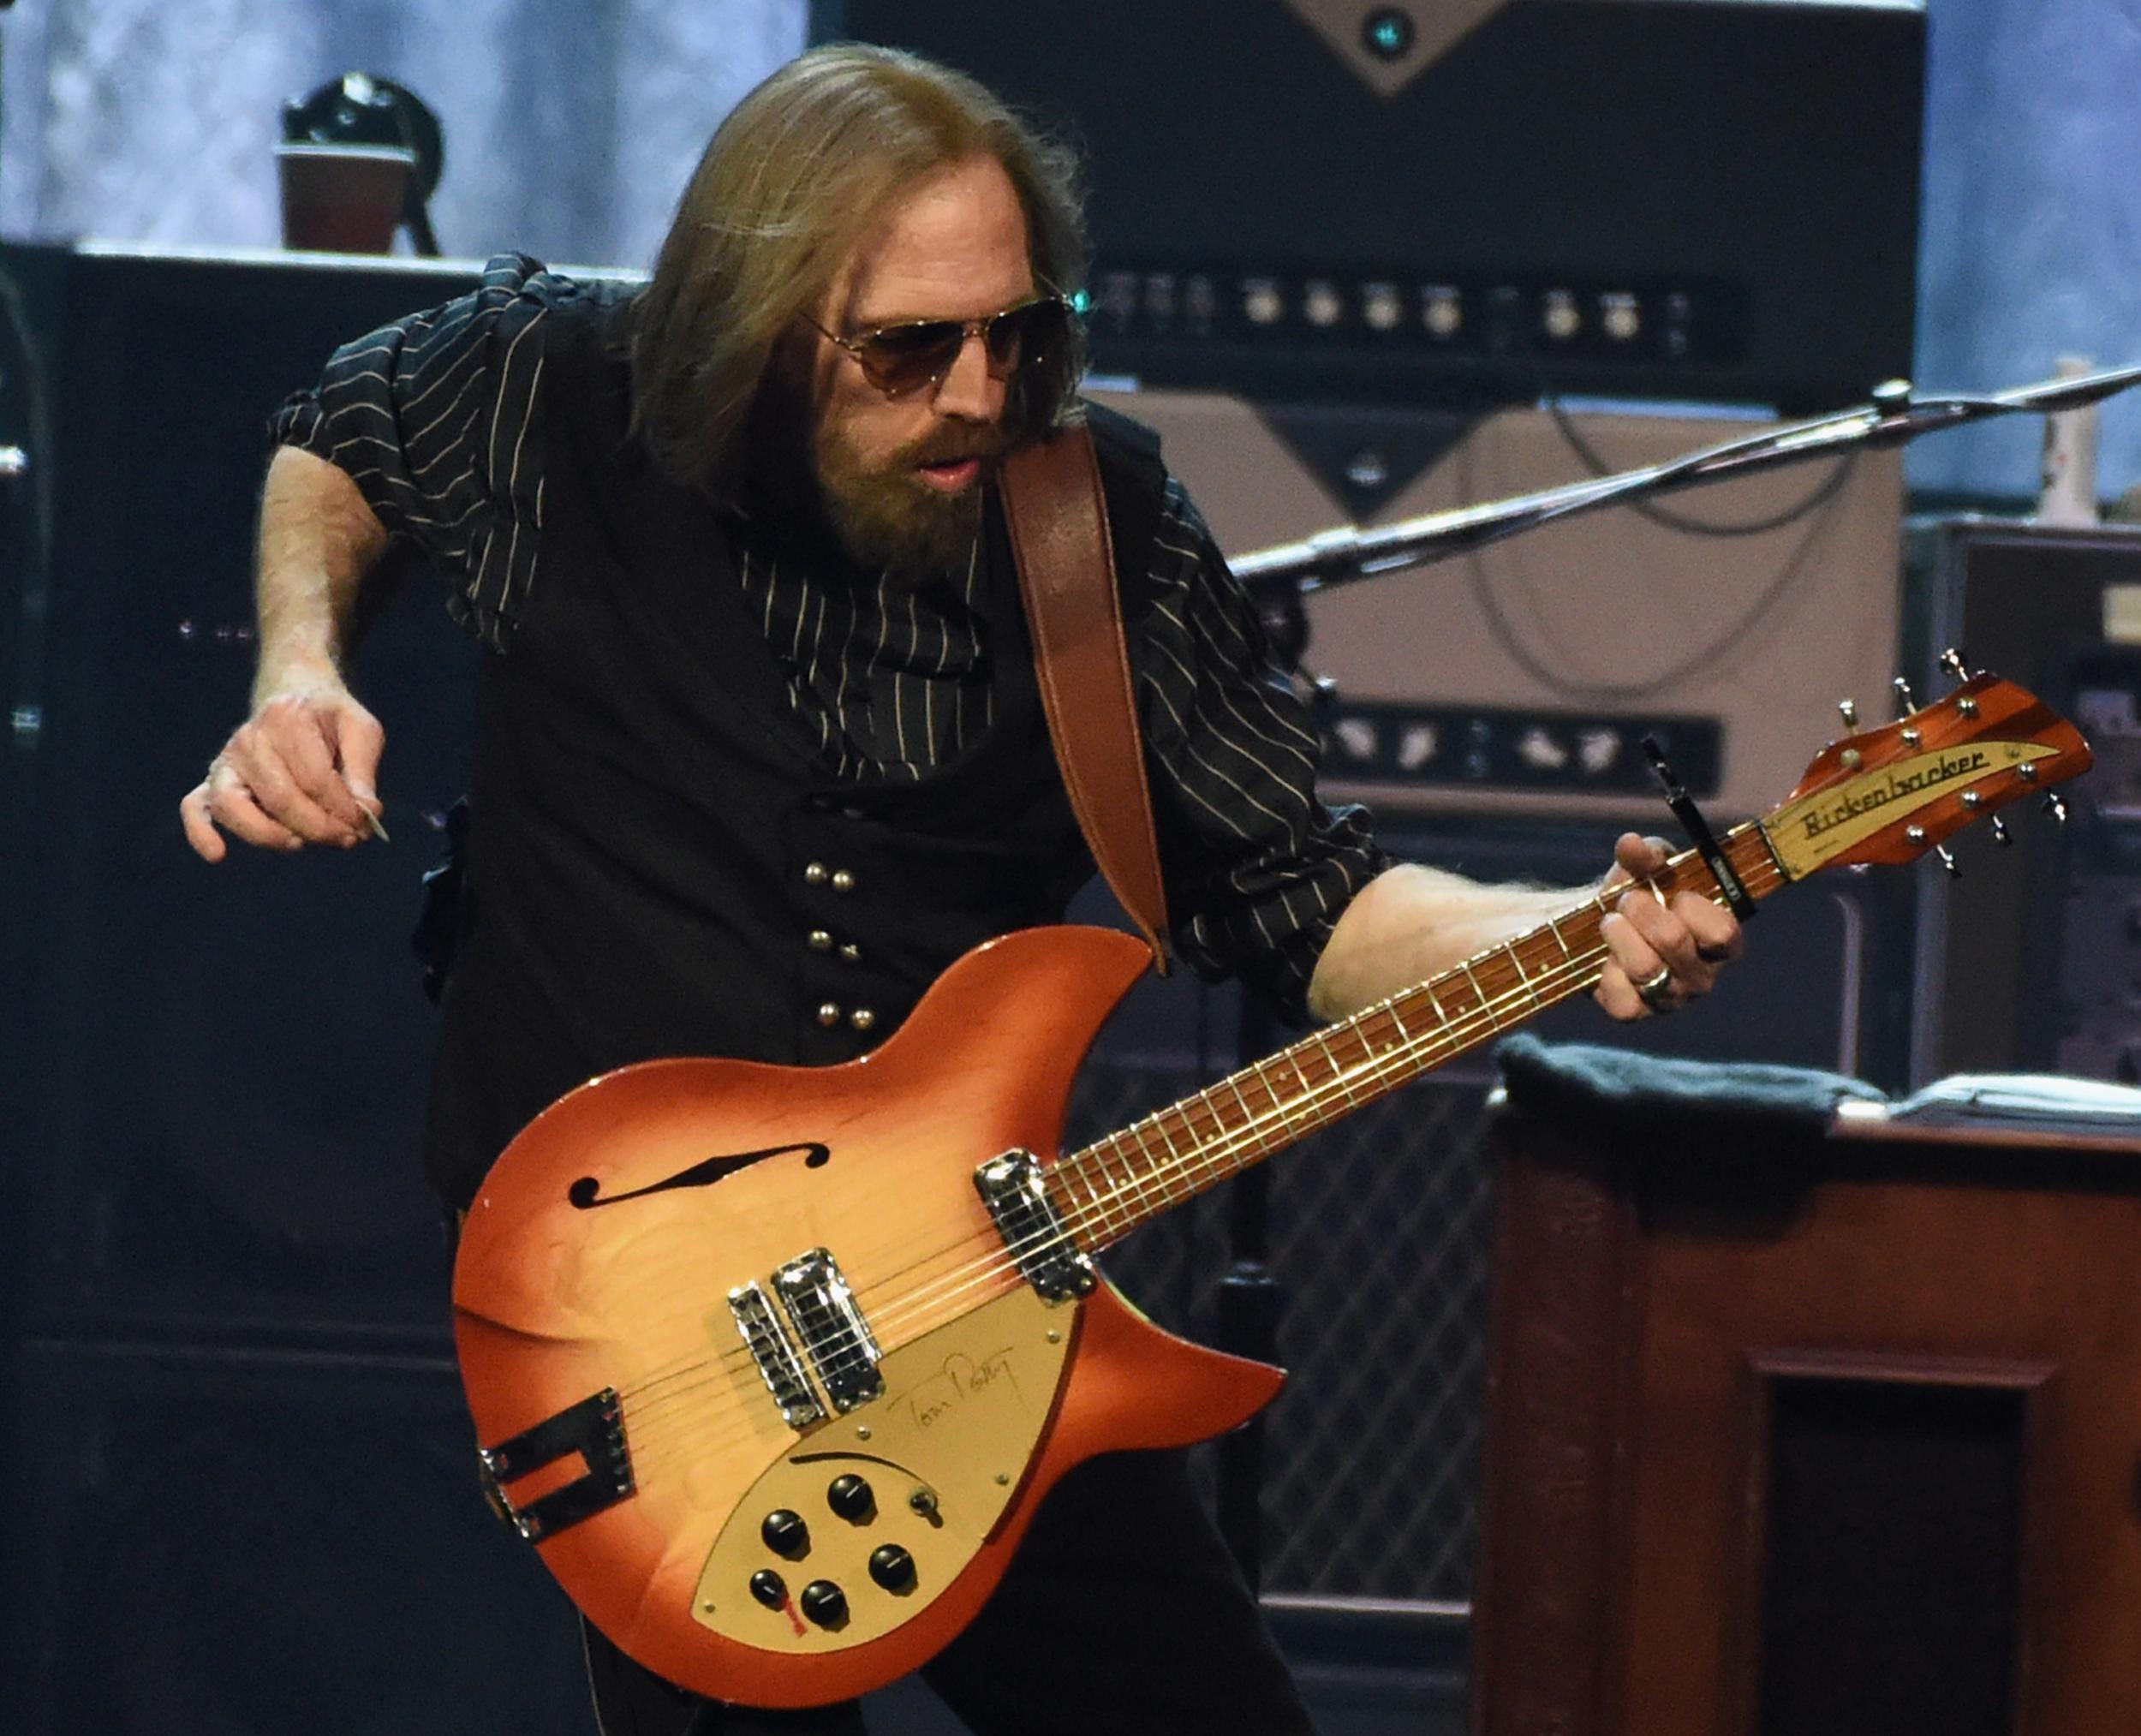 Tom Petty performs during their 40th Anniversary Tour at Bridgestone Arena in Nashville, Tennessee, in April